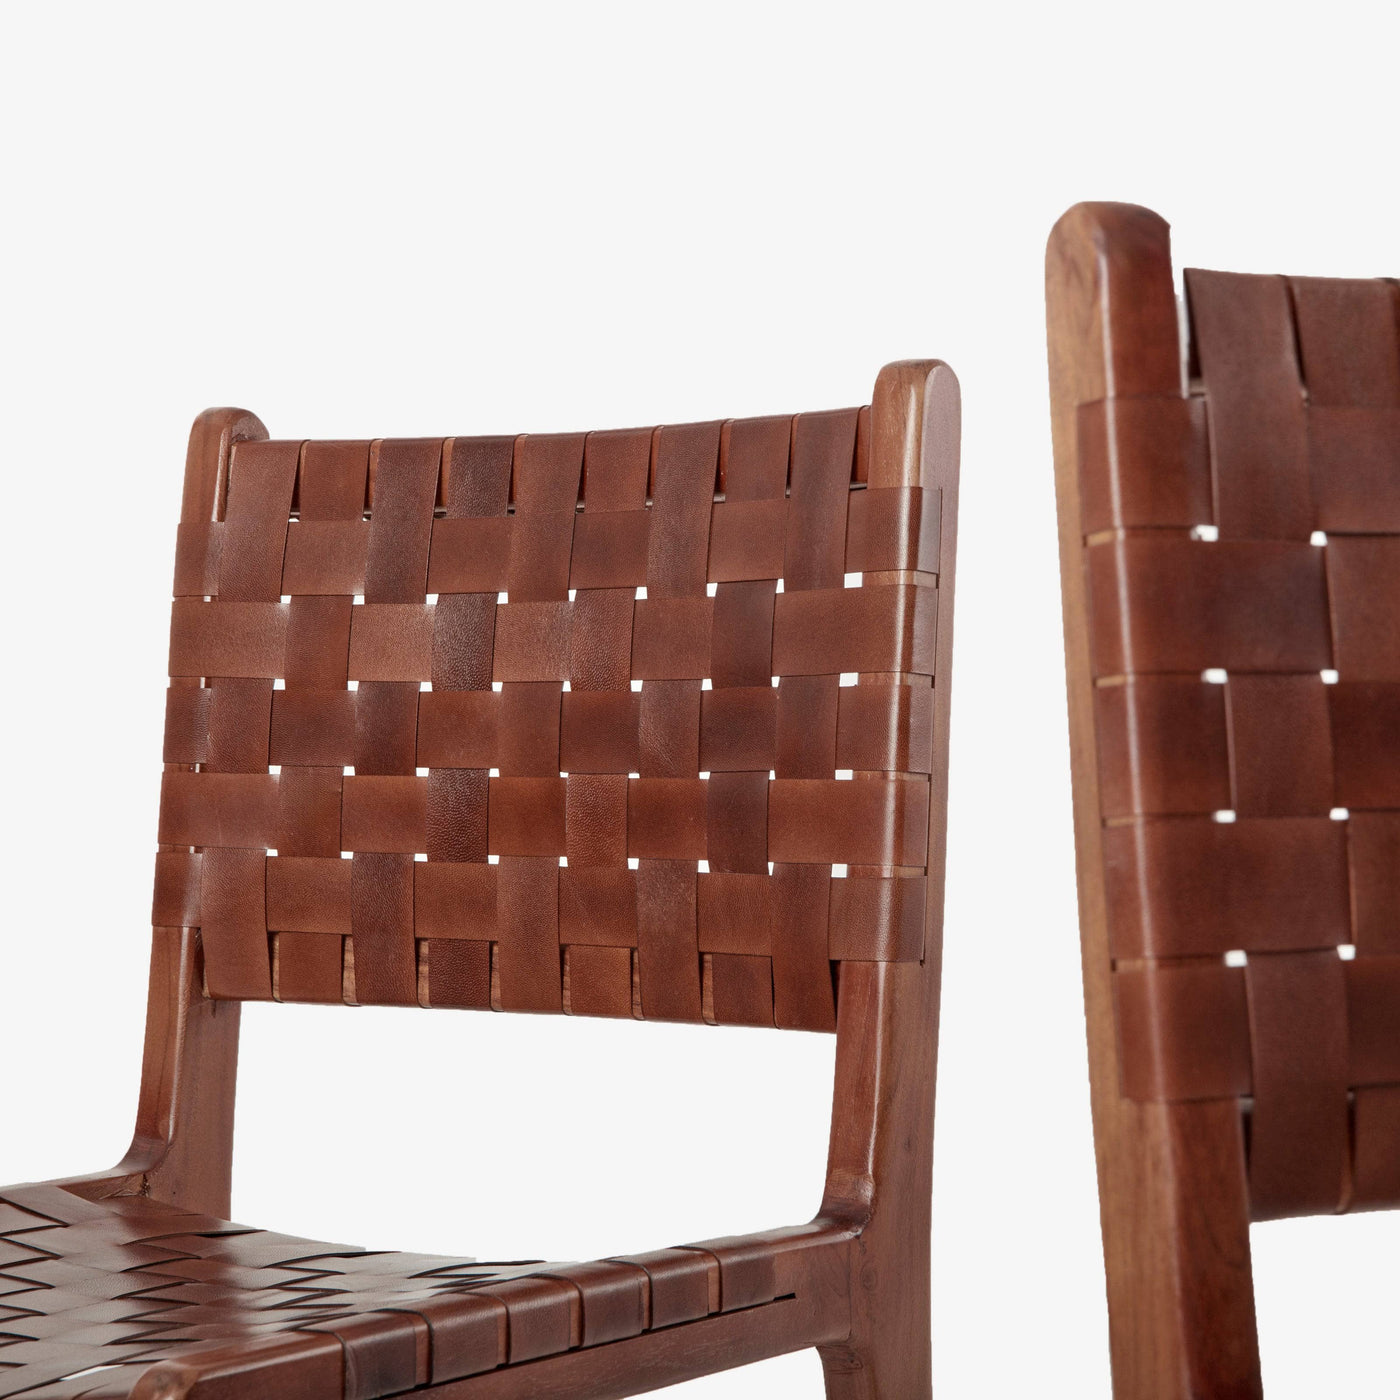 Pomero Woven Leather Dining Chair, Tan Dining Chairs & Benches sazy.com